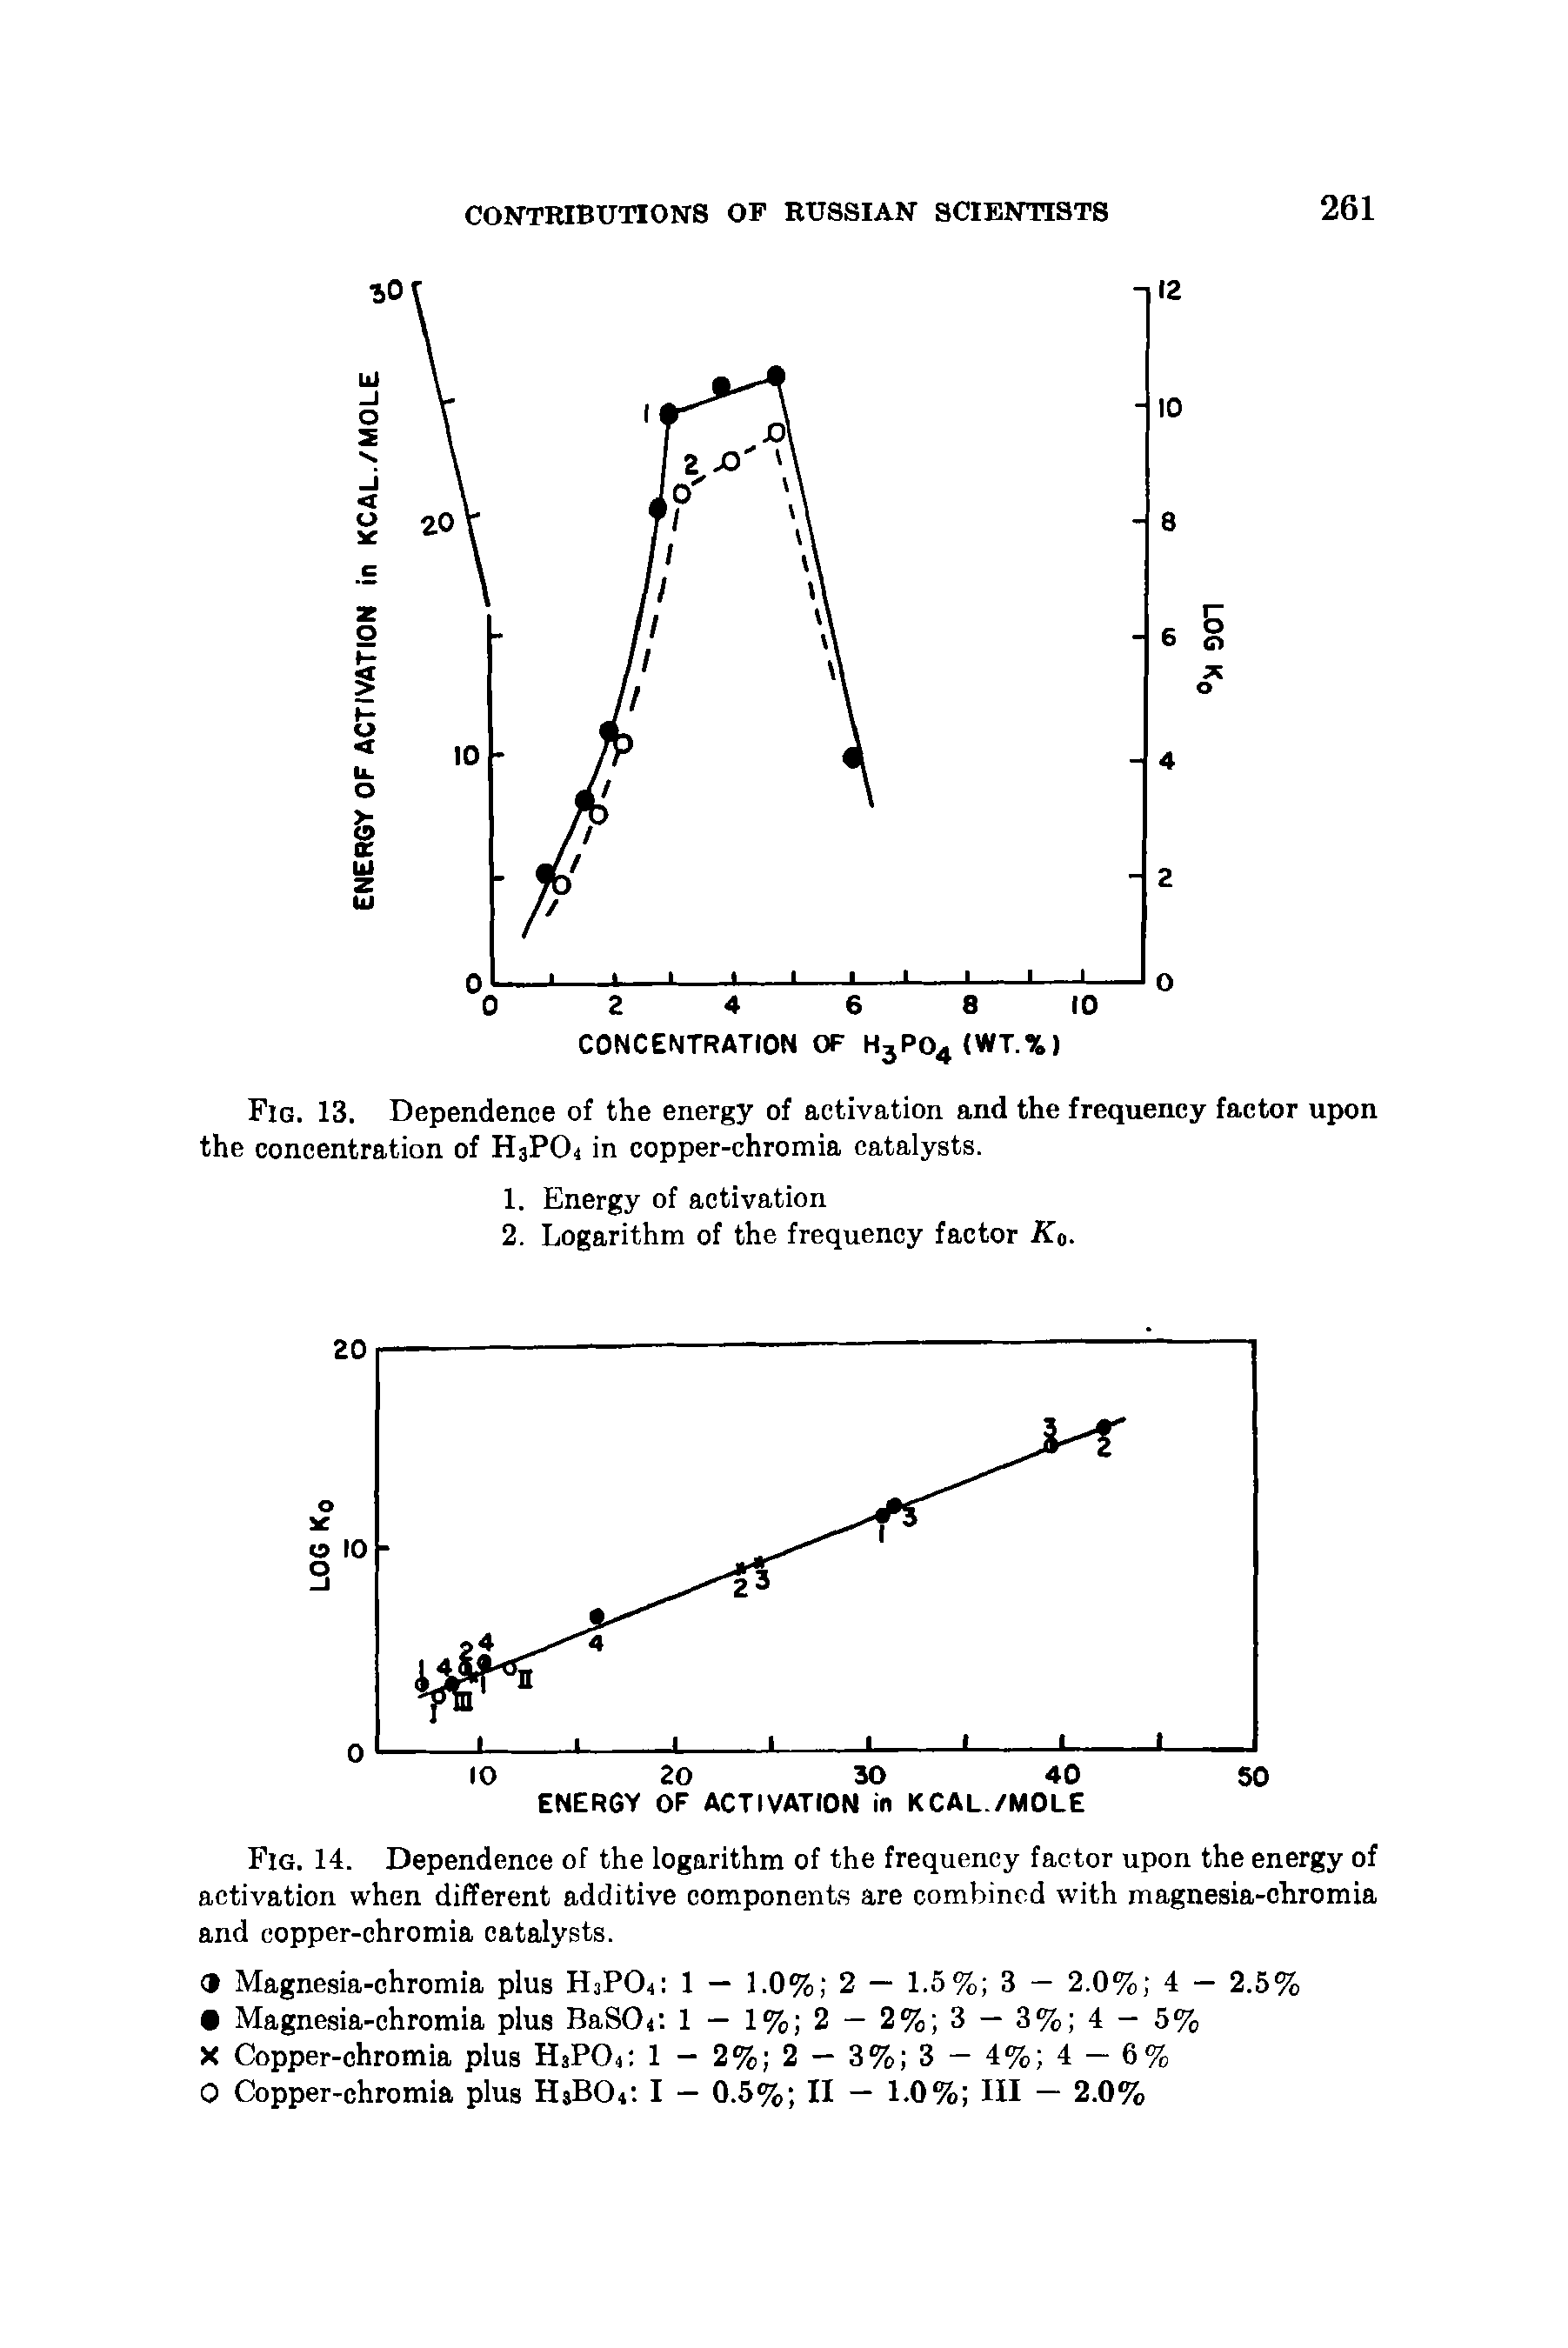 Fig. 13. Dependence of the energy of activation and the frequency factor upon the concentration of H3PO4 in copper-chromia catalysts.